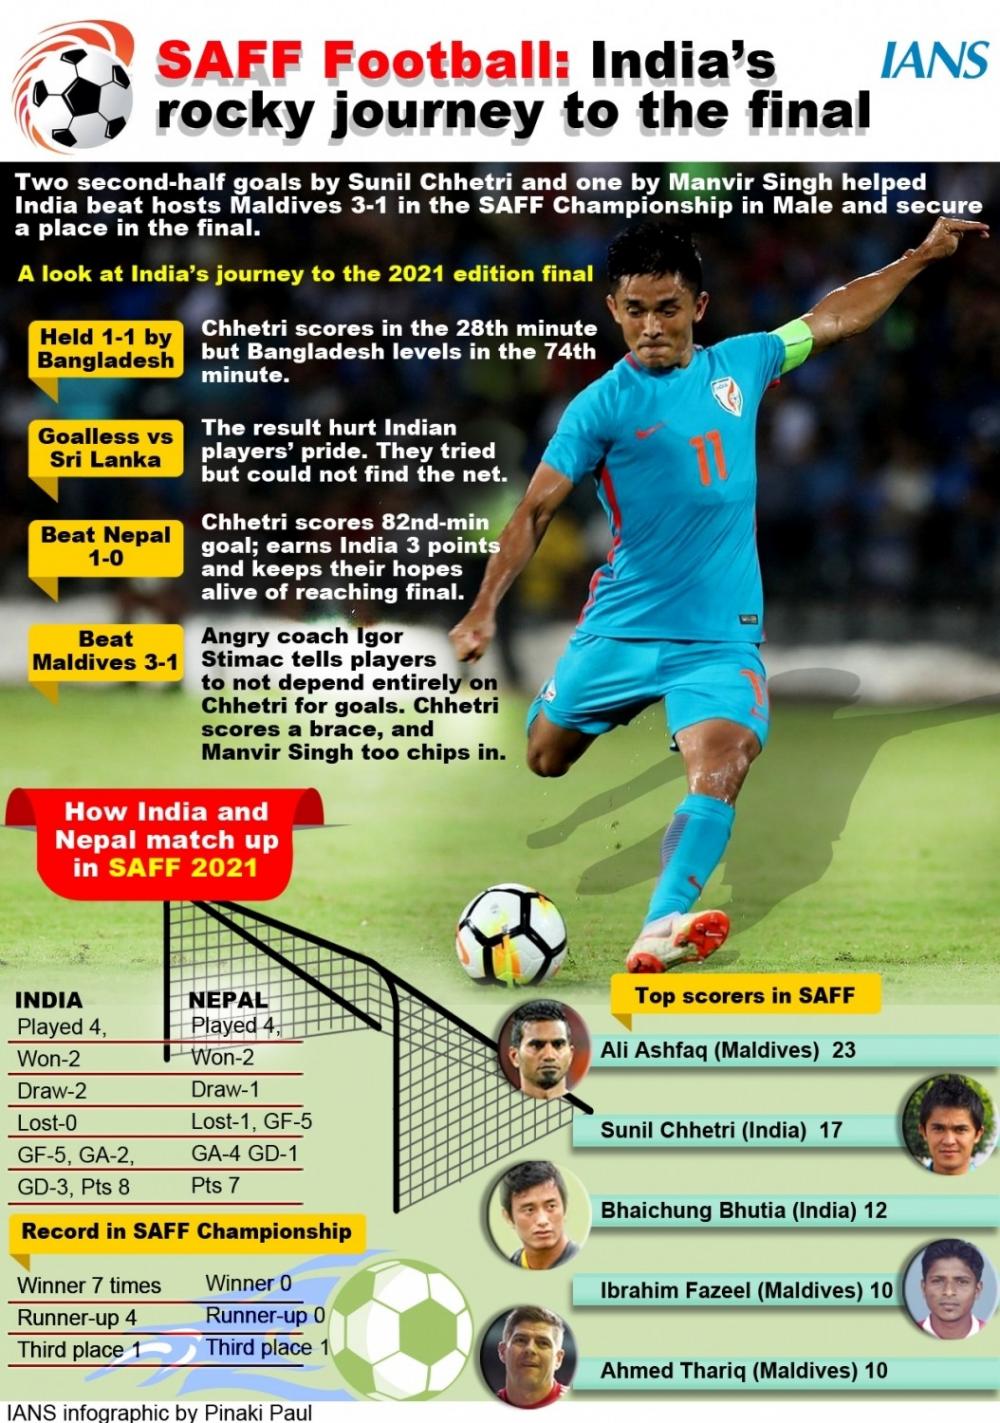 The Weekend Leader - Nepal's teamwork a worry for India's Chhetri ahead of SAFF final